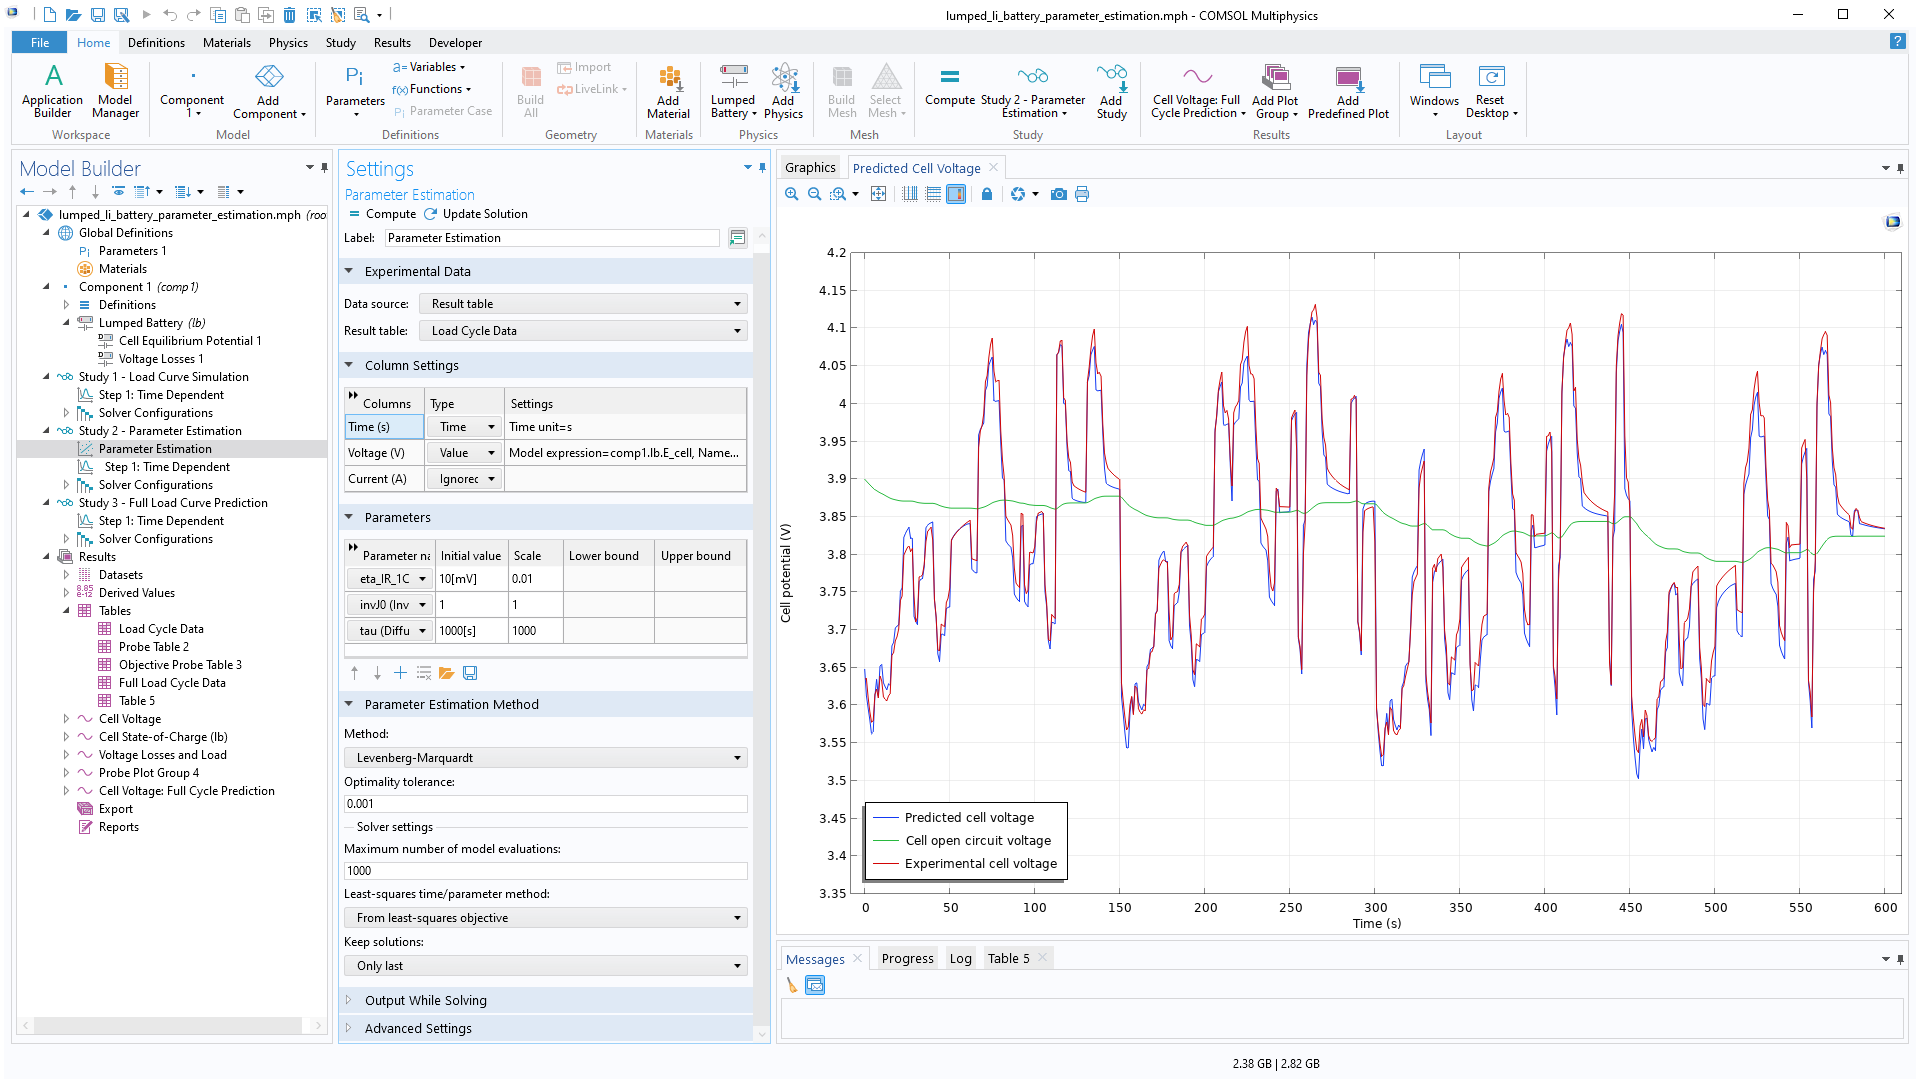 The COMSOL Multiphysics UI showing the Model Builder with the Parameter Estimation node highlighted, the corresponding Settings window, and a 1D plot in the Graphics window.